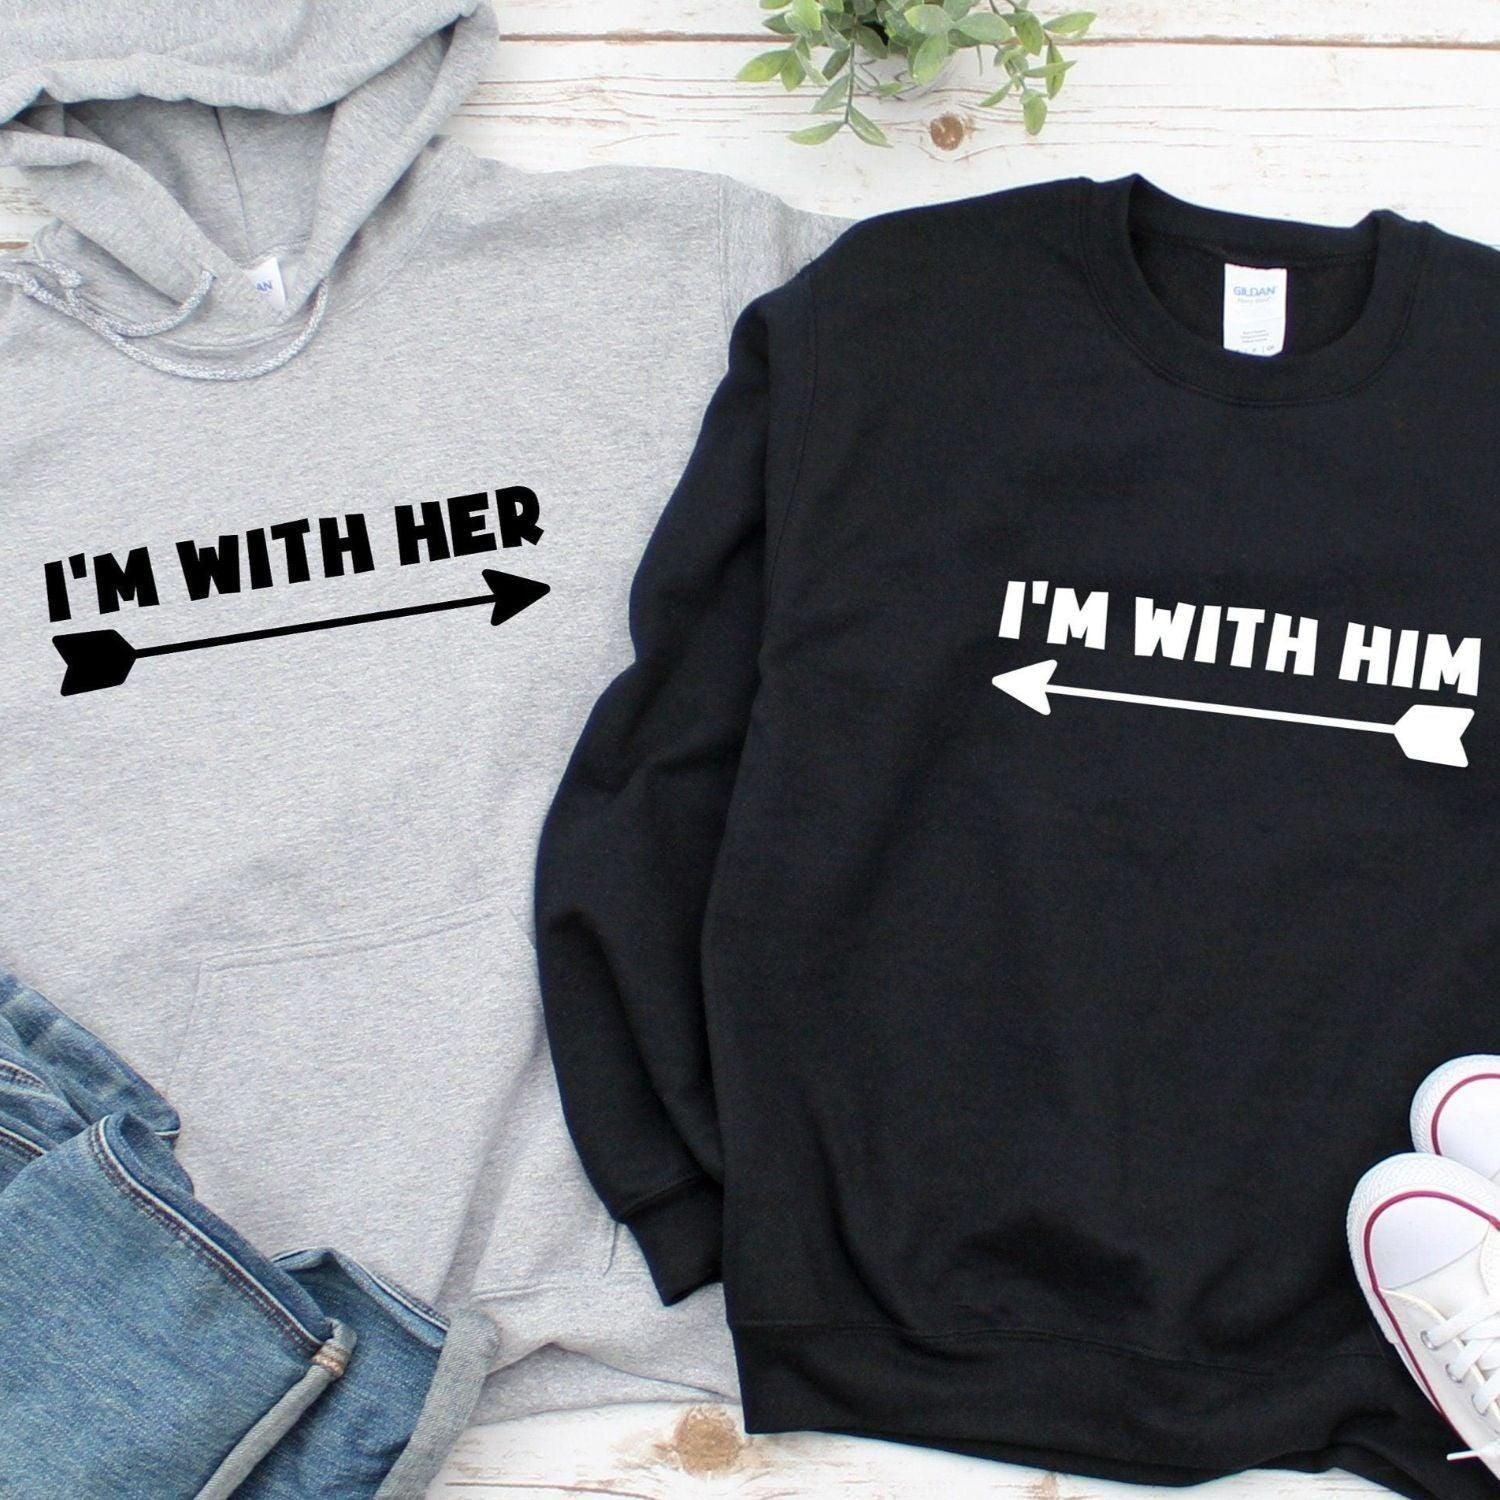 Gift for Lovebirds: Coordinated Outfits - 'I'm With Her' & 'I'm With Him' Combo Set - 4Lovebirds